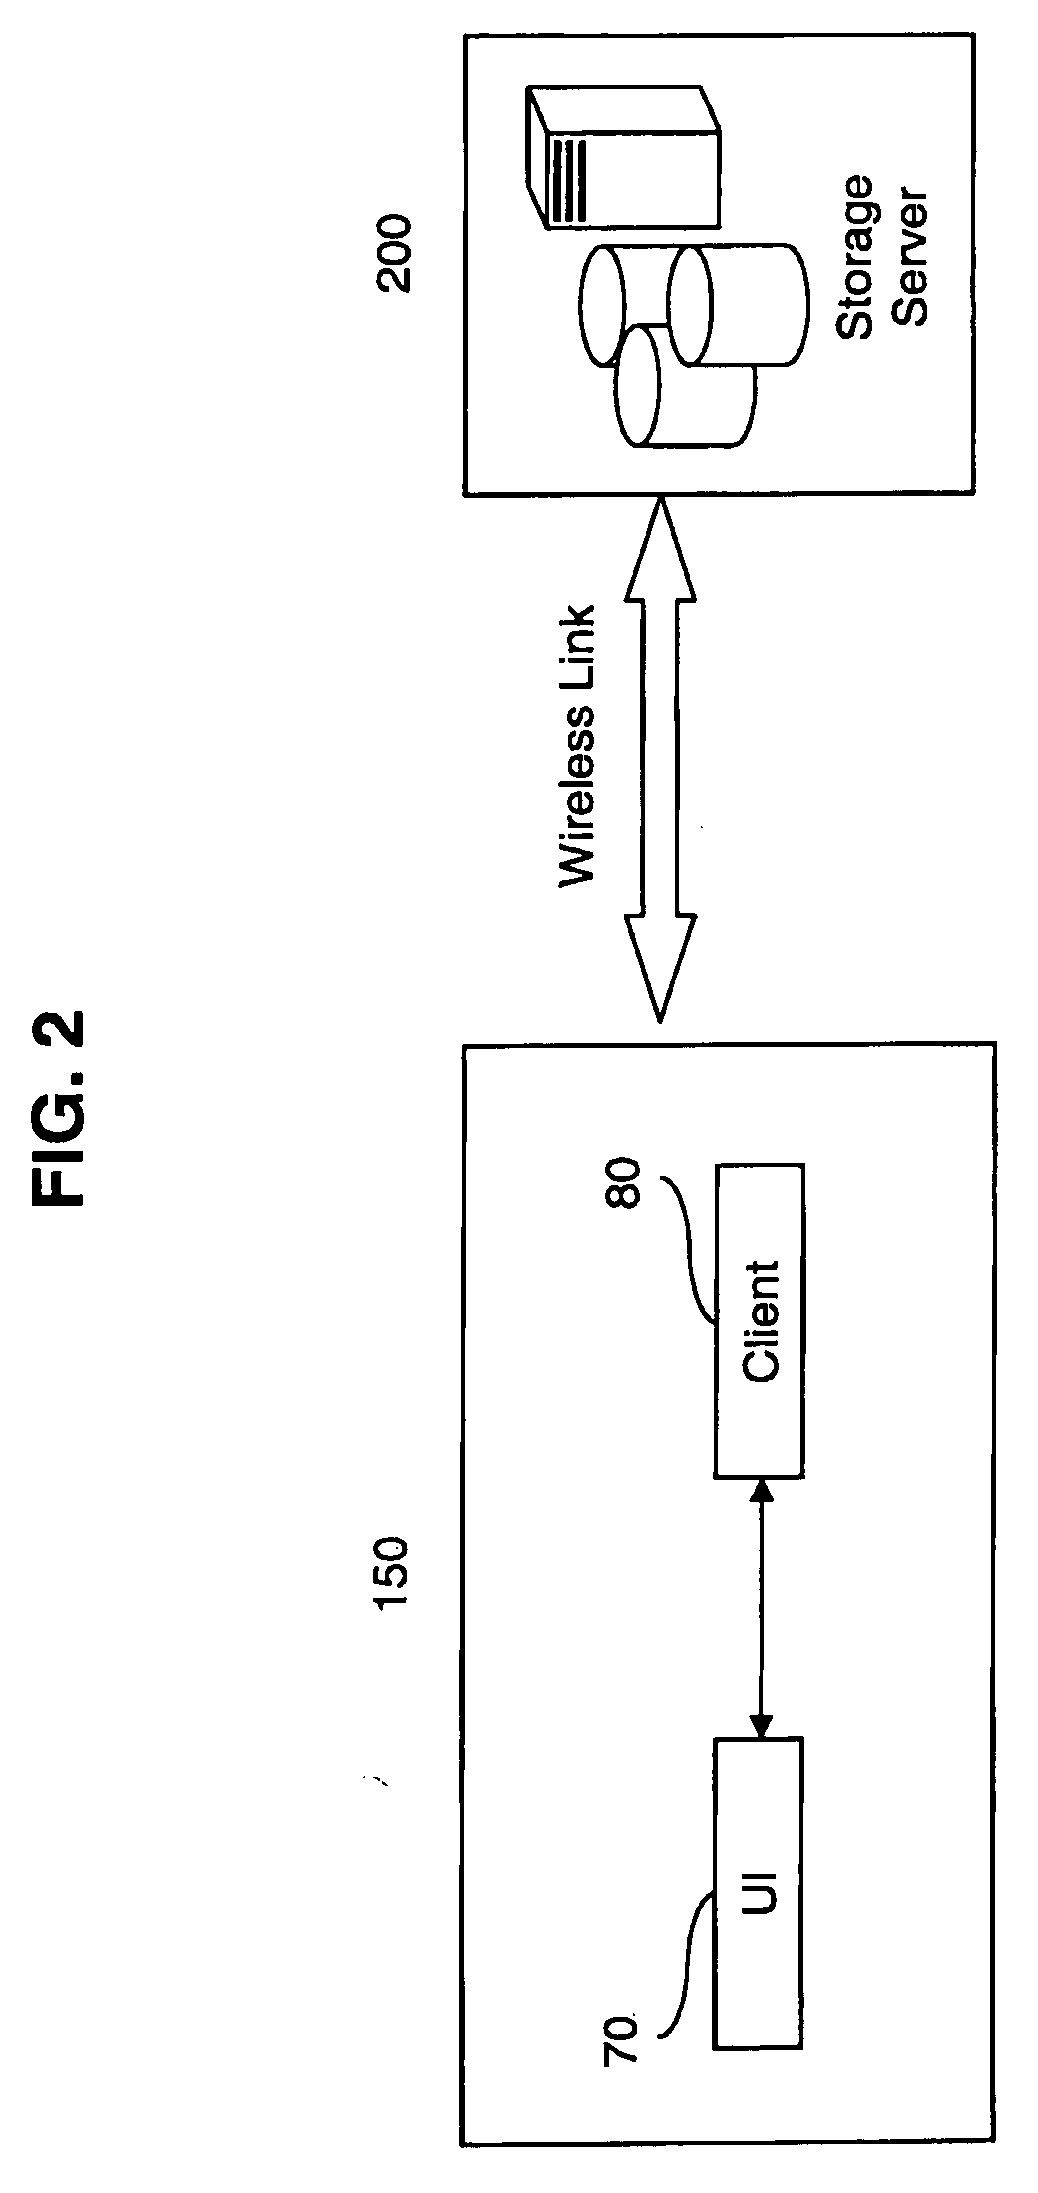 Mobile station with expanded storage space and method of retrieving files by the mobile station